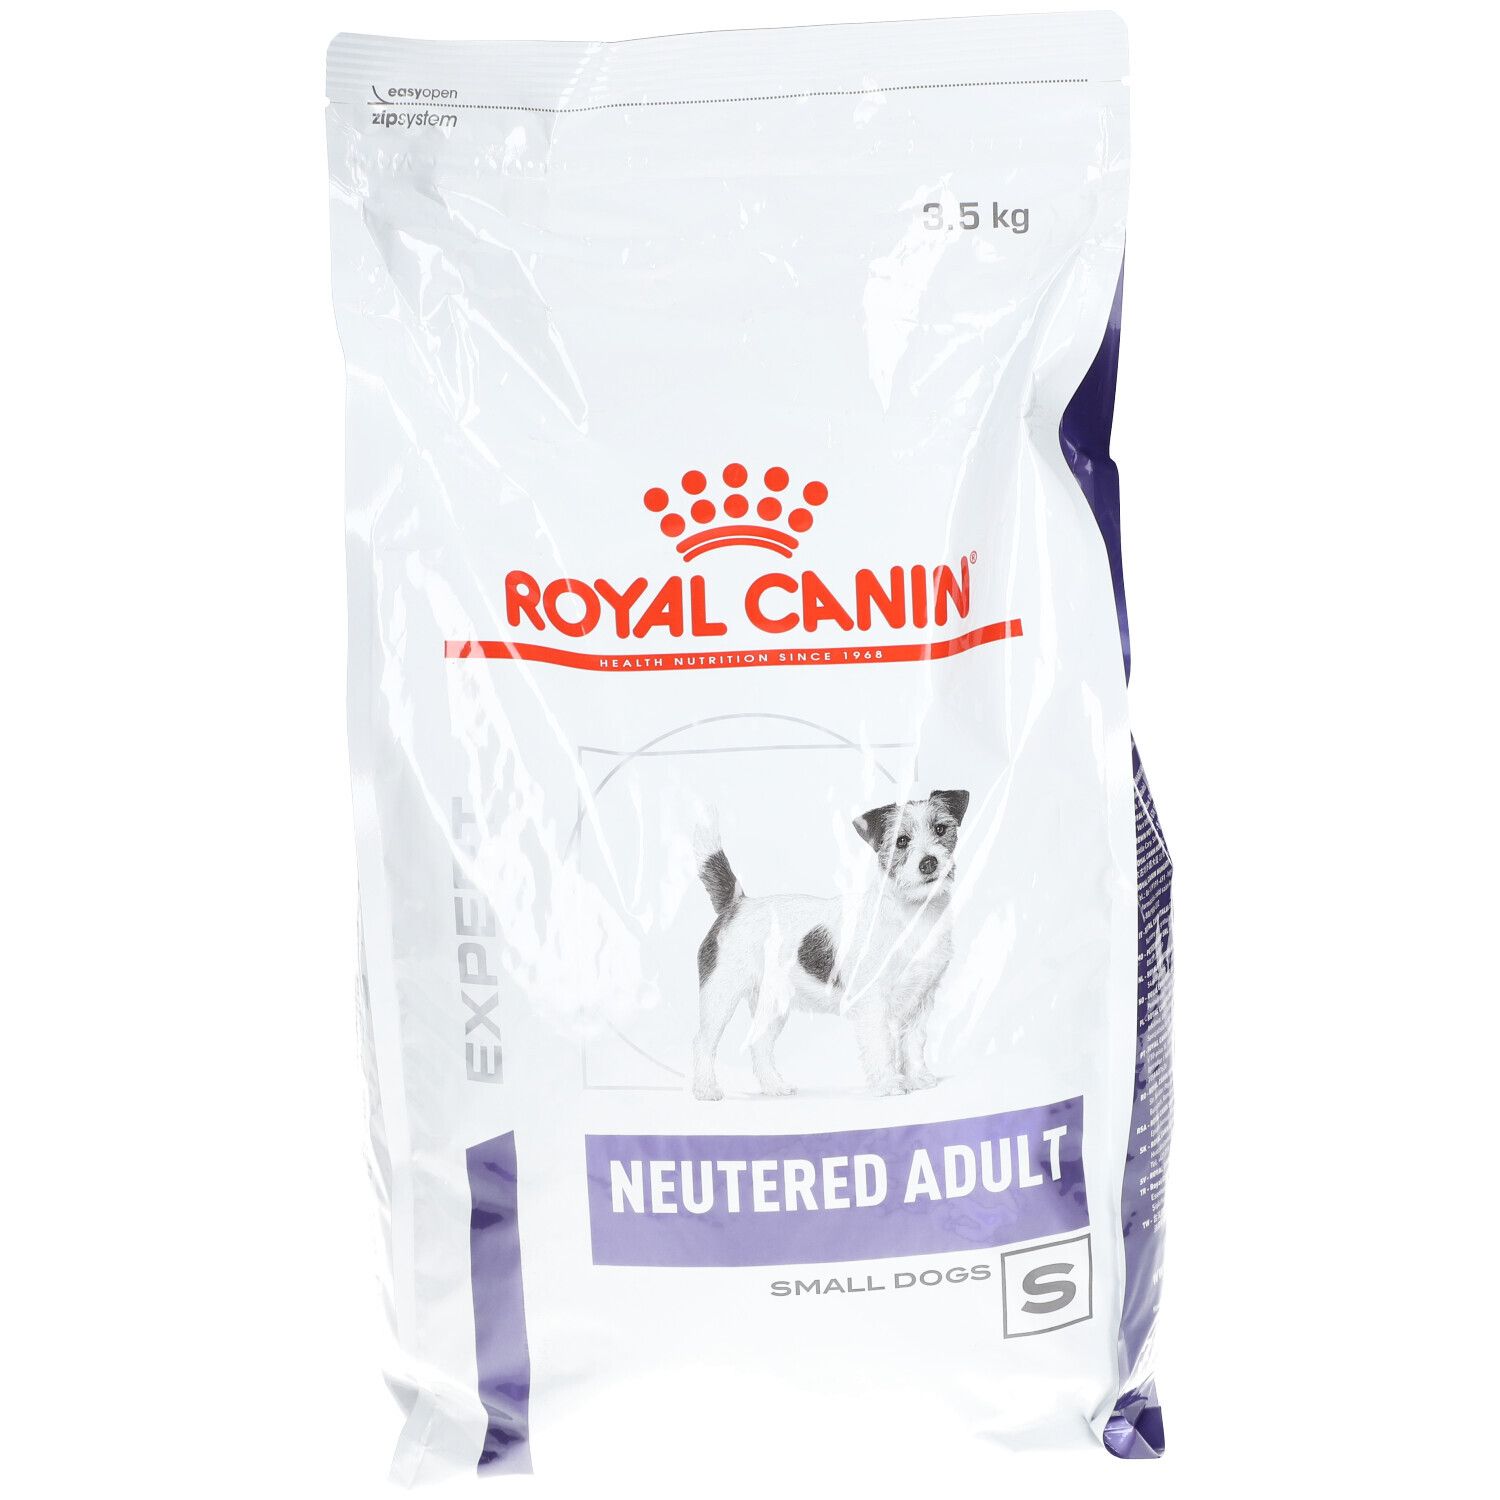 Royal Canin® Neutered Adult Small Dogs